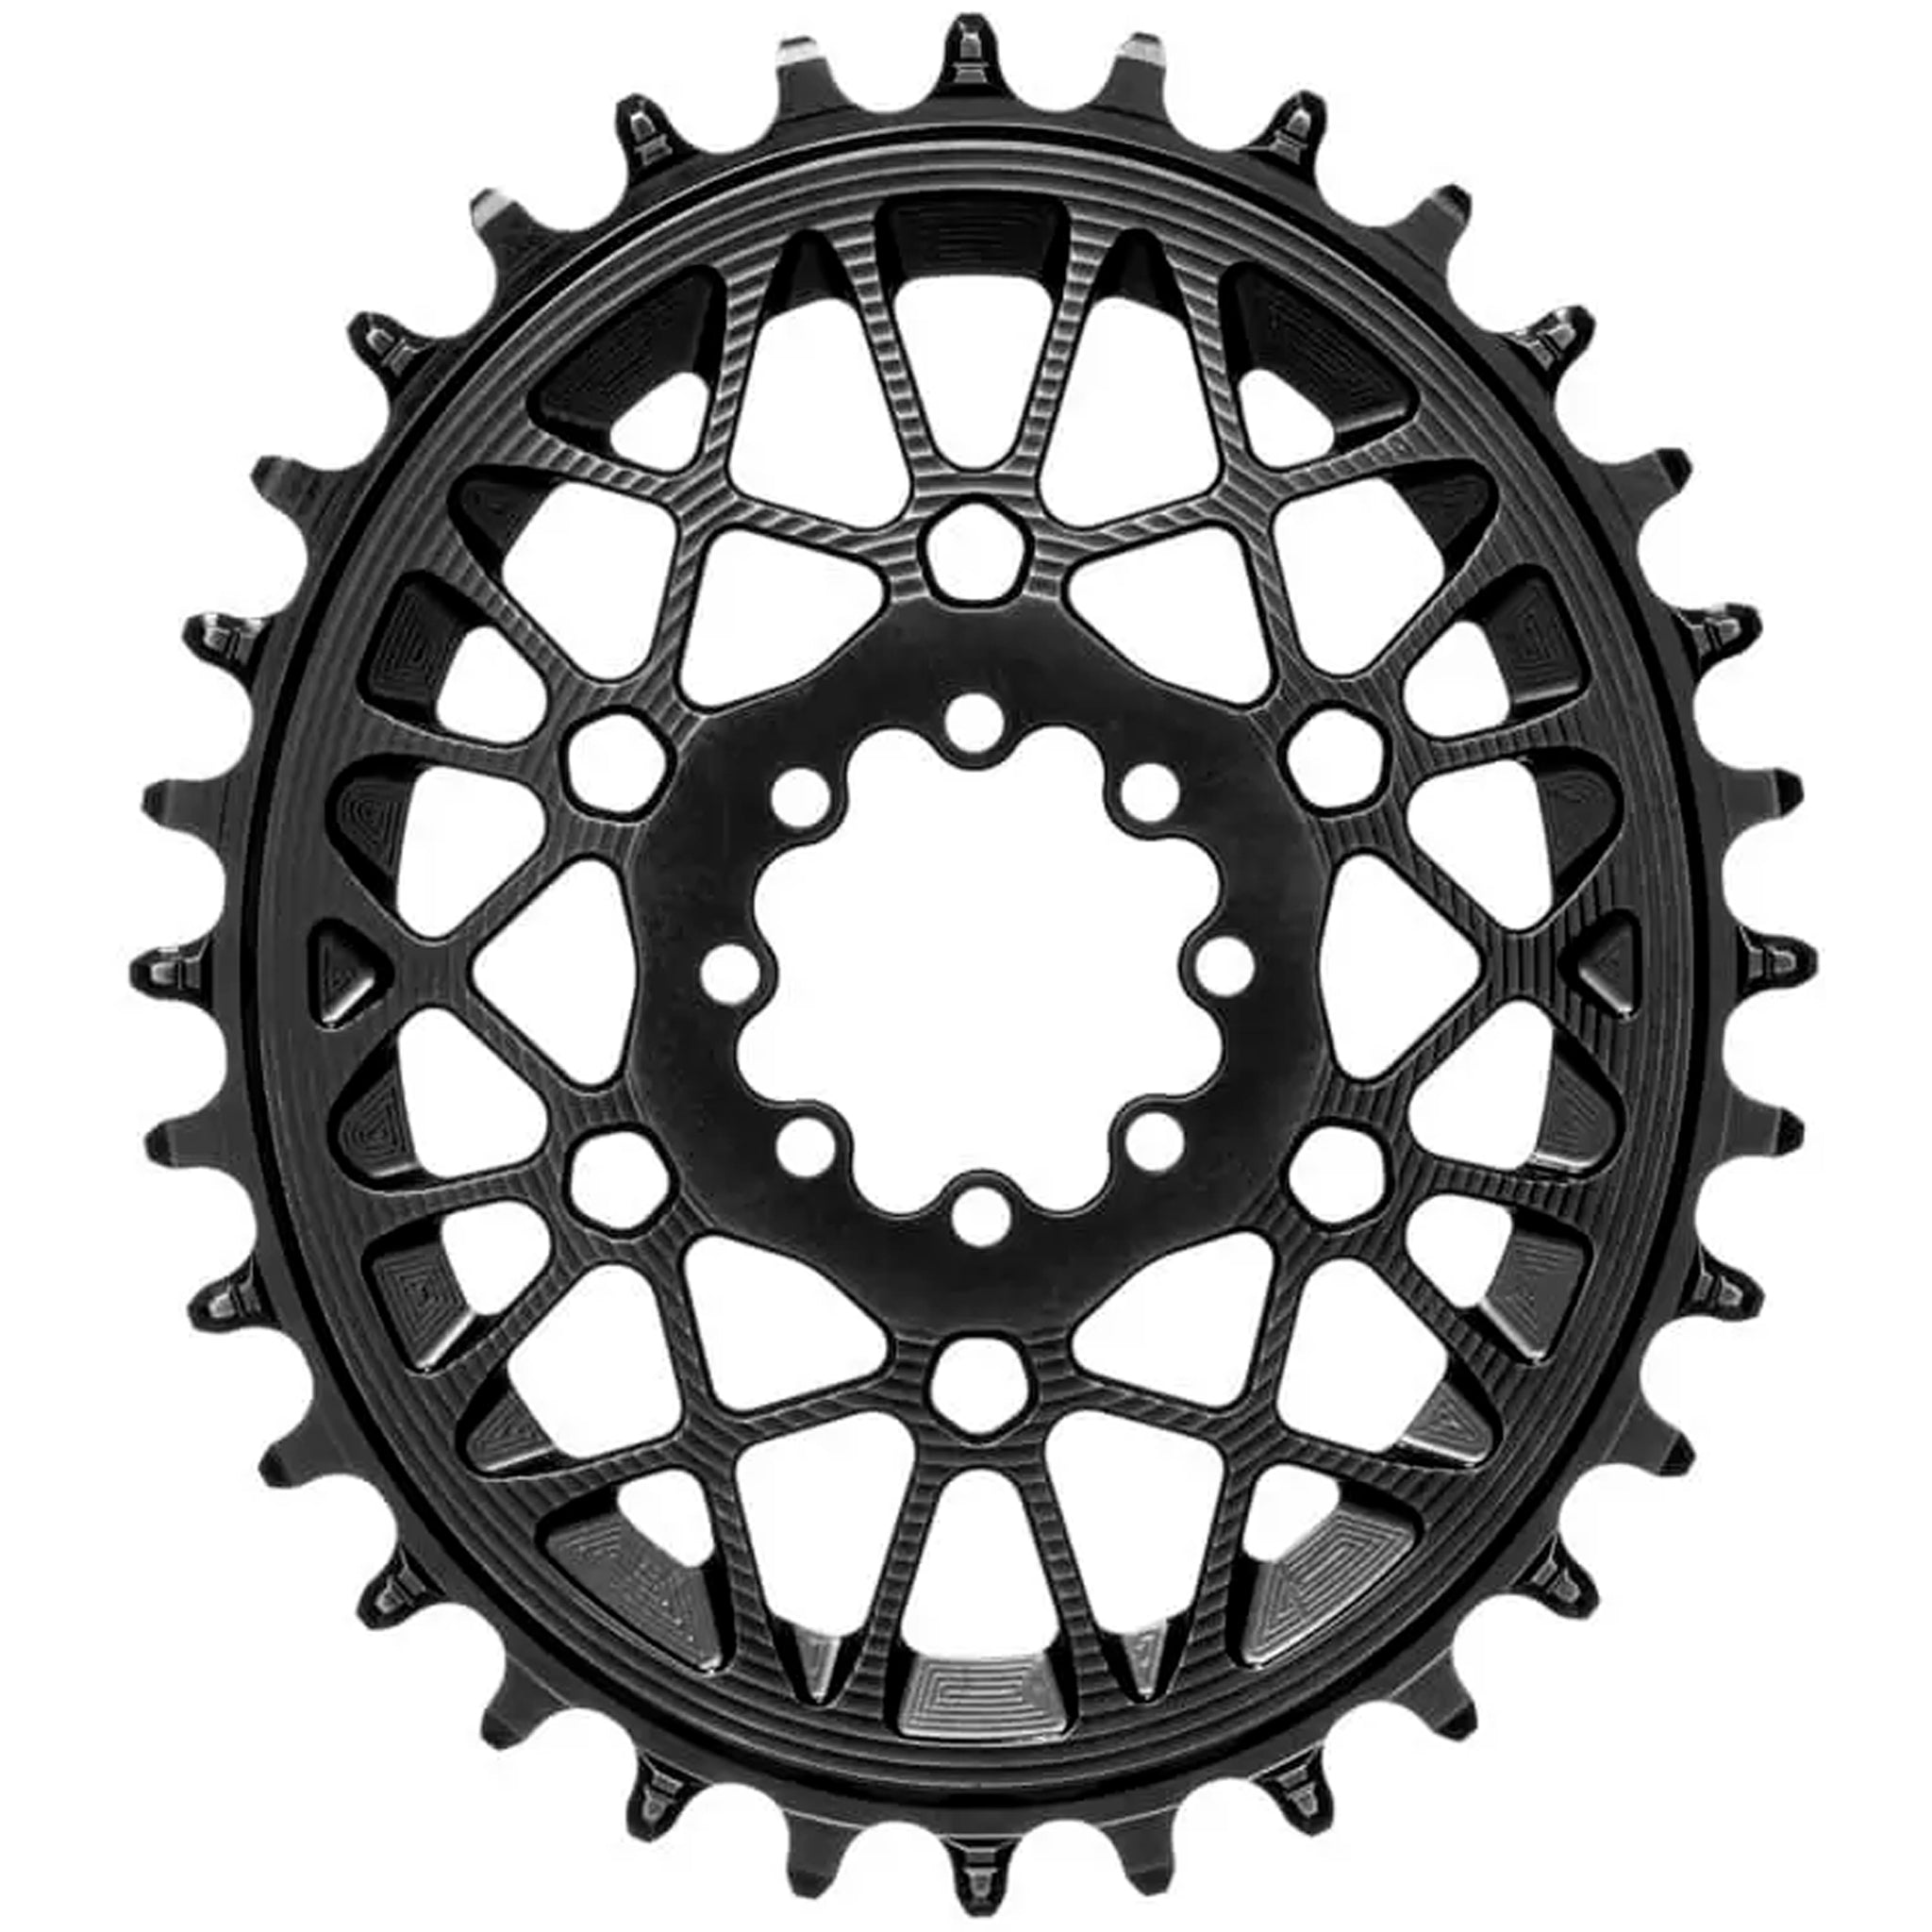 Absolute Black Oval SRAM T-Type DM 8-Hole Boost Chainring 30T Blk